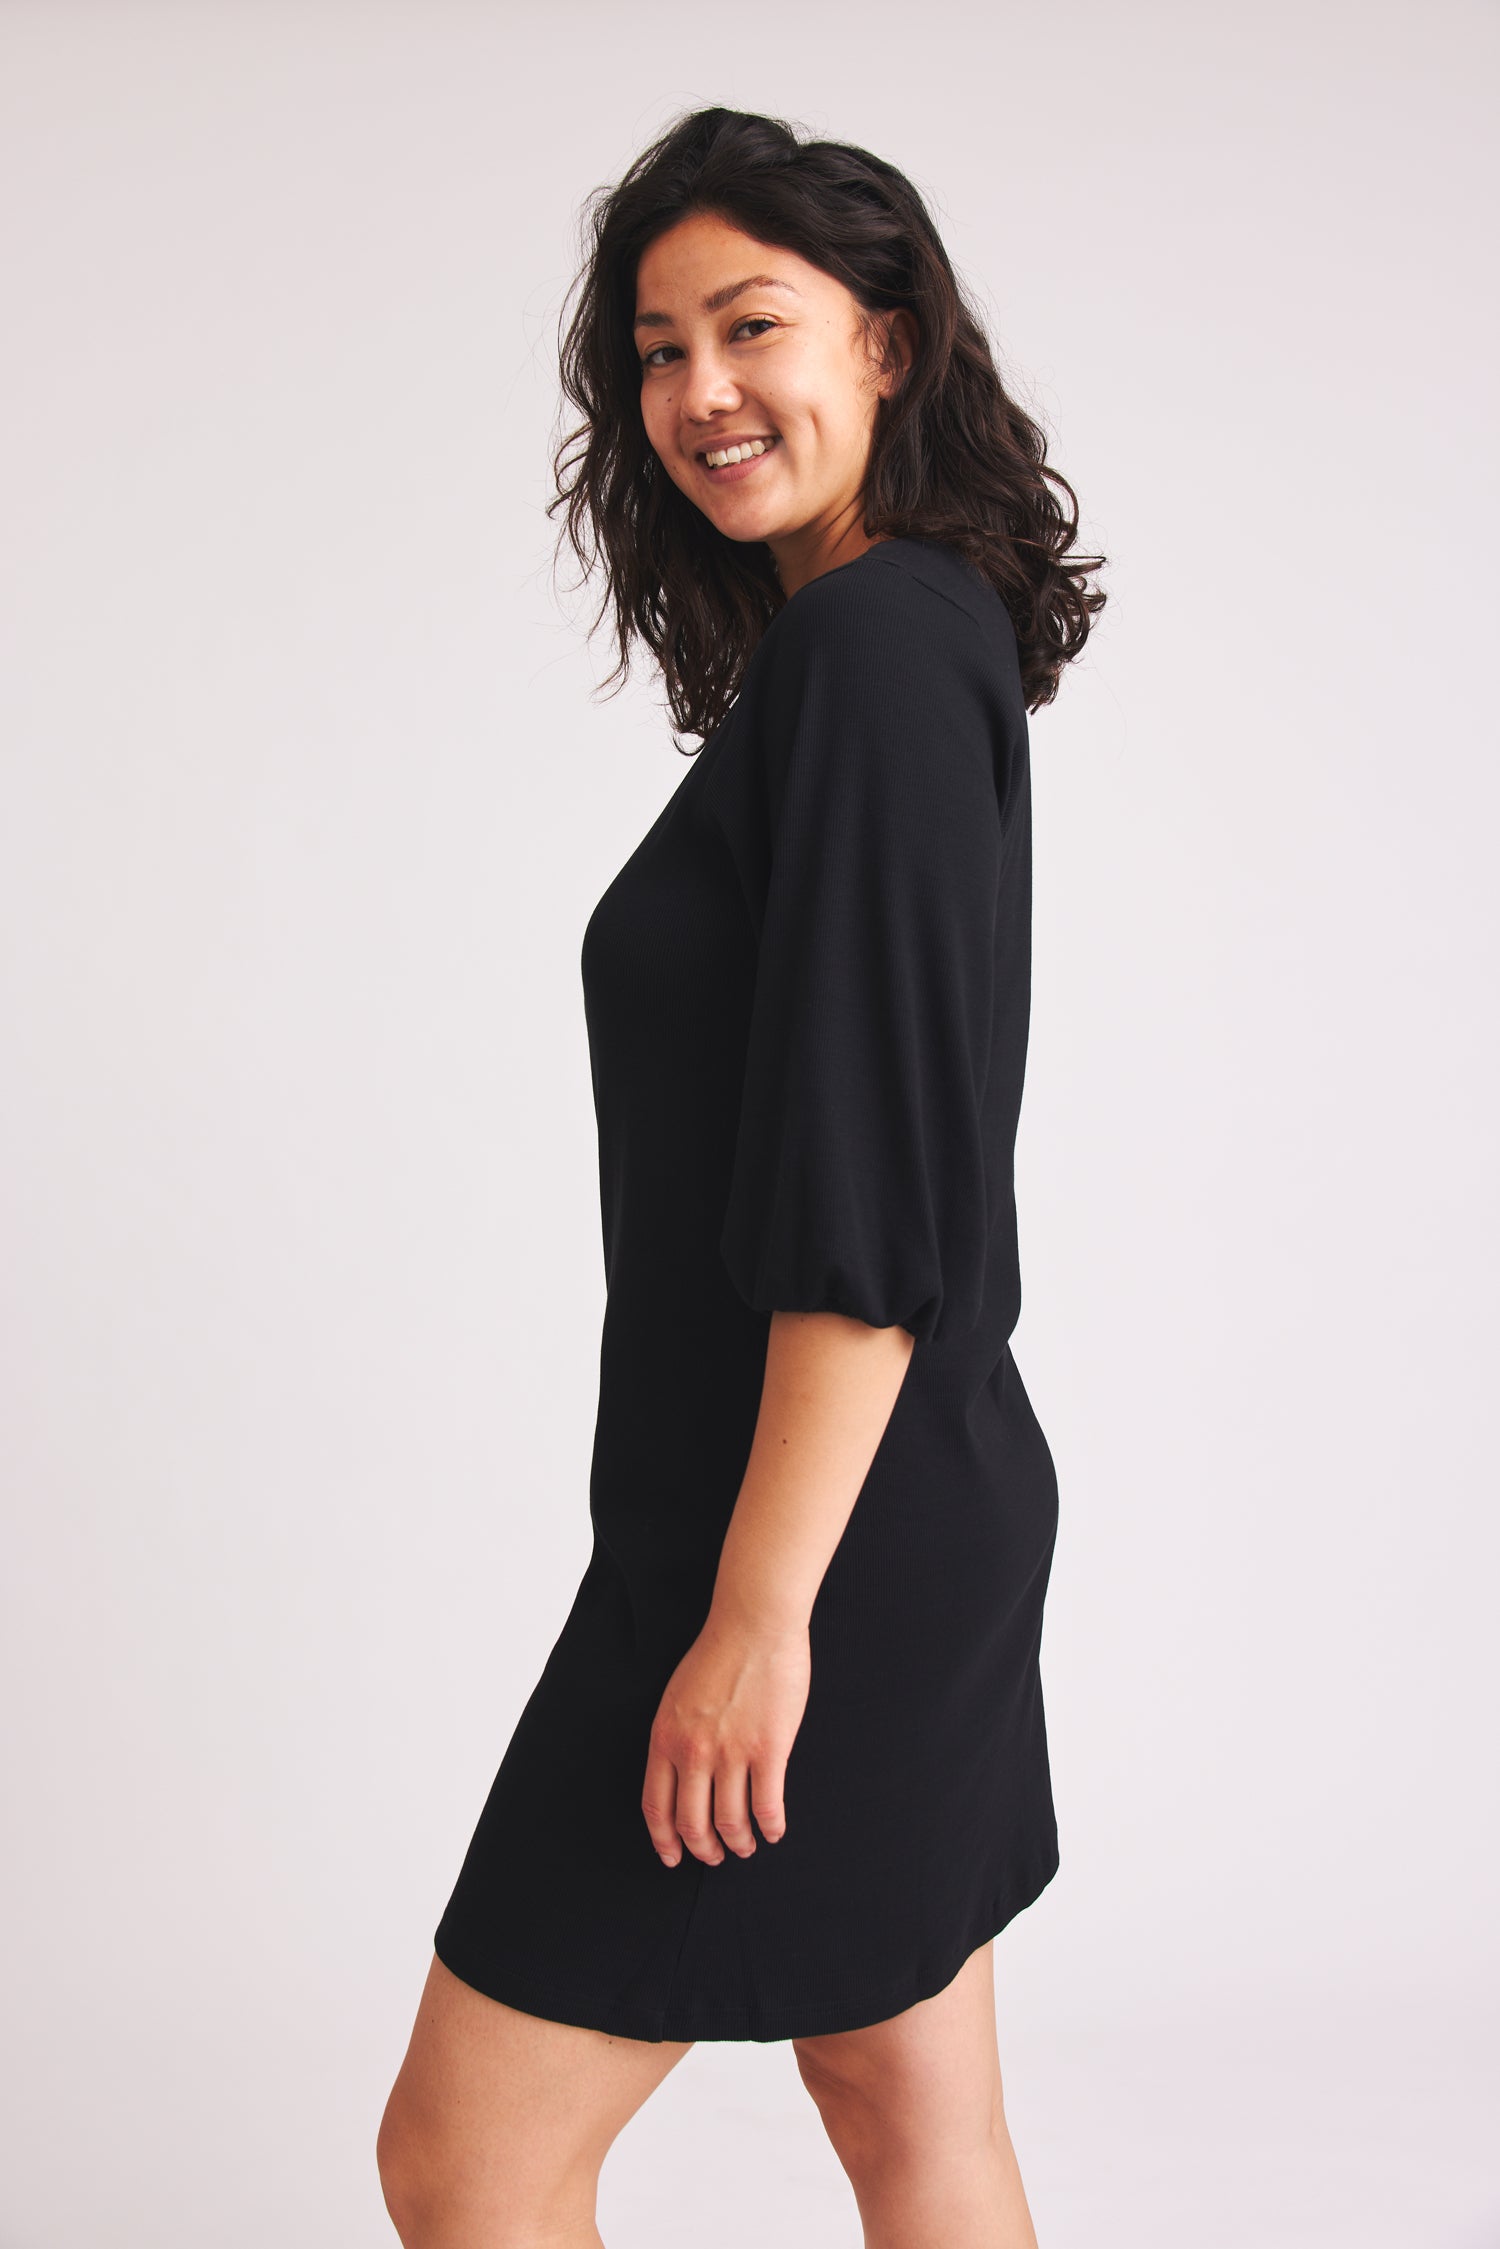 Black organic cotton Bruni dress from Baige the Label